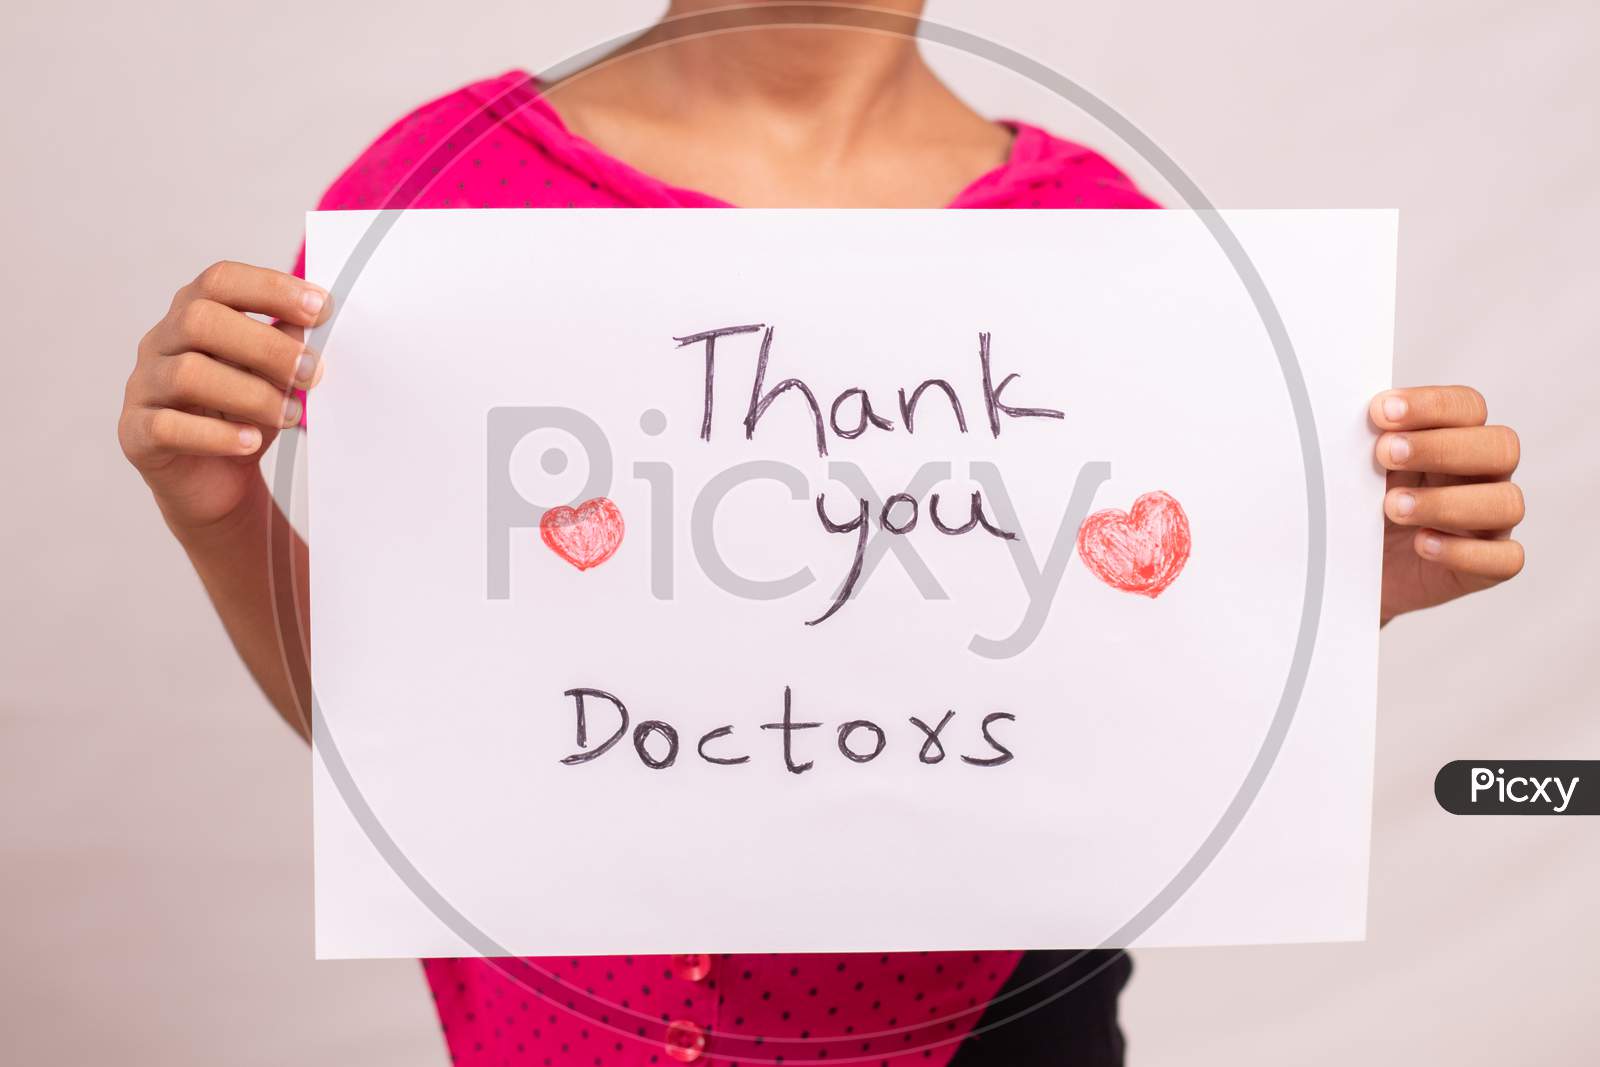 Kid Holding Thankful Greetings To The Doctors And Medical Frontliners Signage, Who Working During Coronavirus Or Covid-19 Pandemic